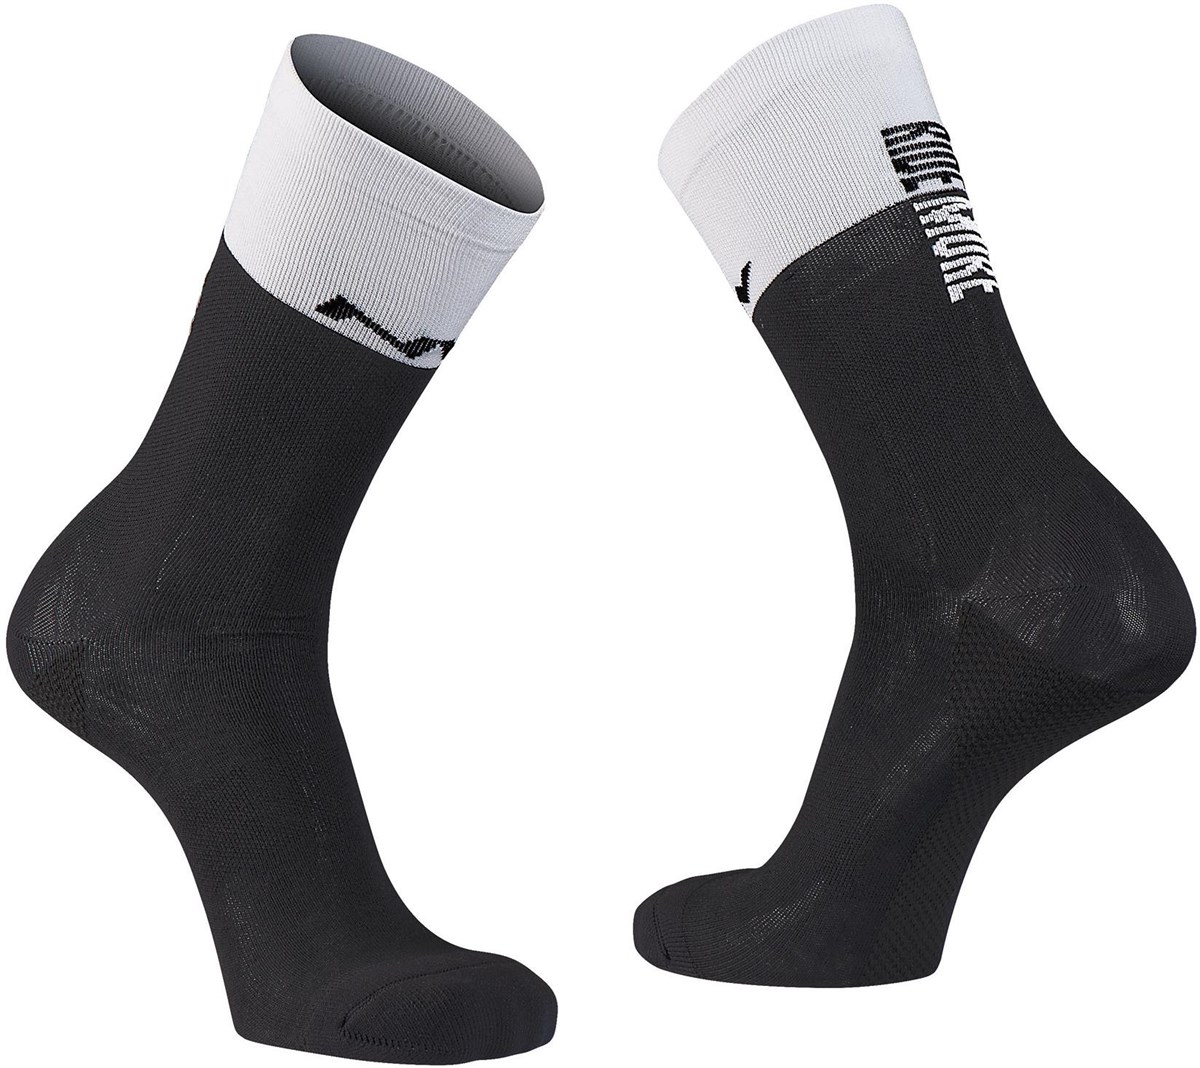 Northwave Work Less Ride More Wool Cycling Socks product image